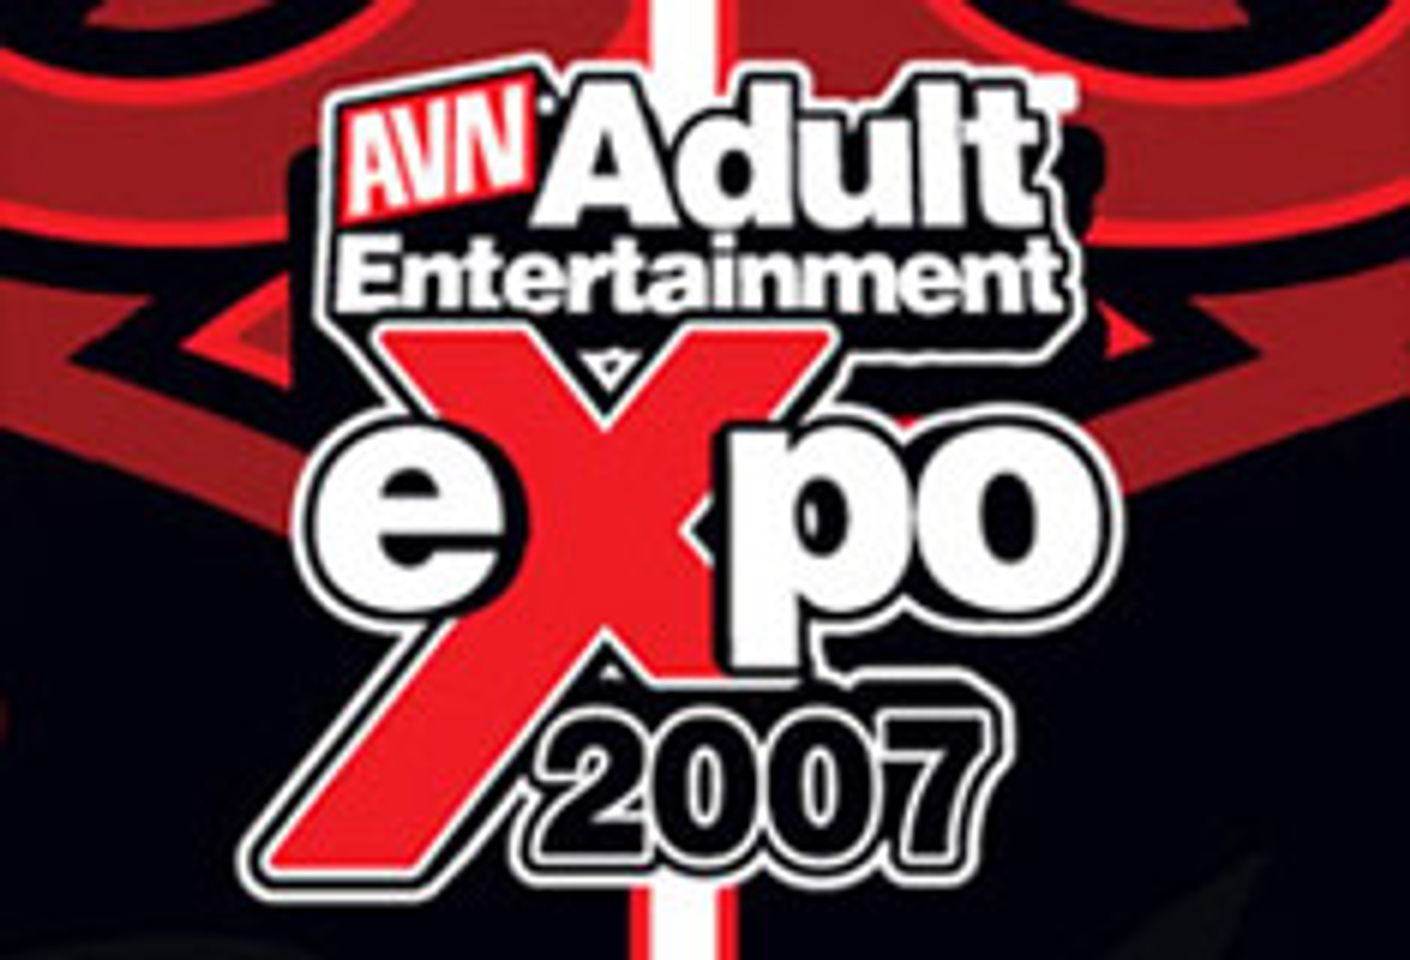 Industry Gears Up for AVN Adult Entertainment Expo